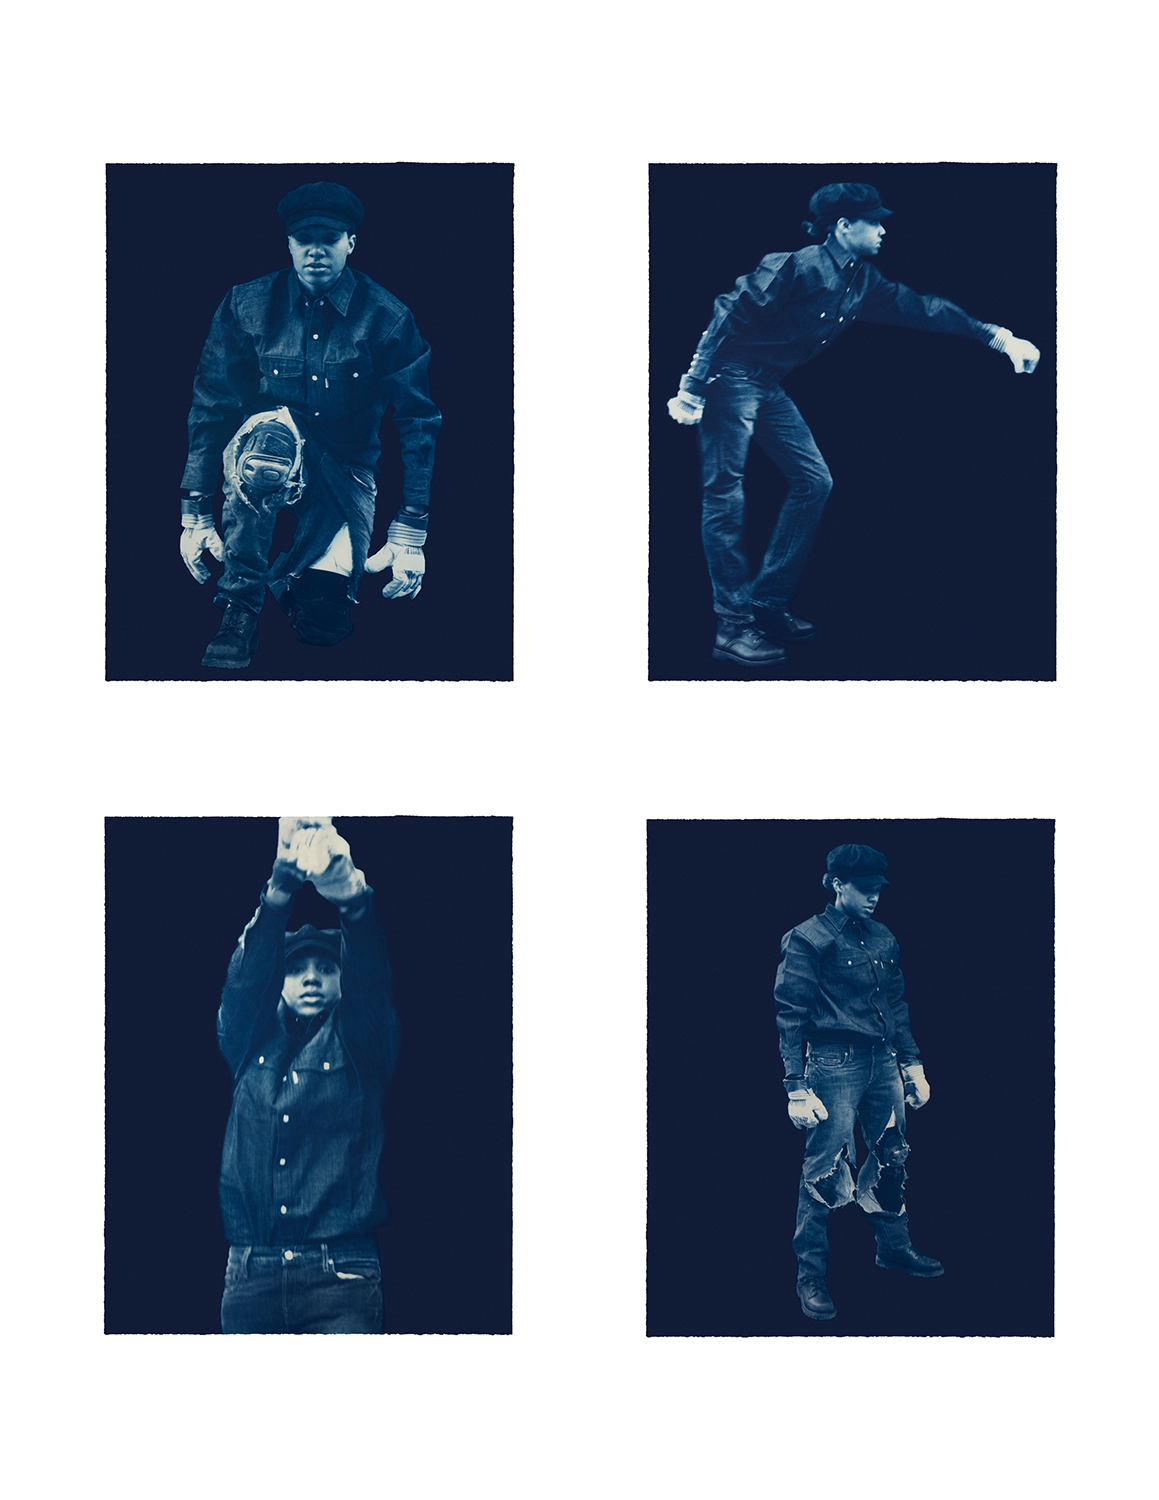 If Everybody's Work Is Equally Important? (II), 2017, cyanotype, 28 x 22 inches each image and sheet, suite of 4, edition of 12. Price:  $12,000.